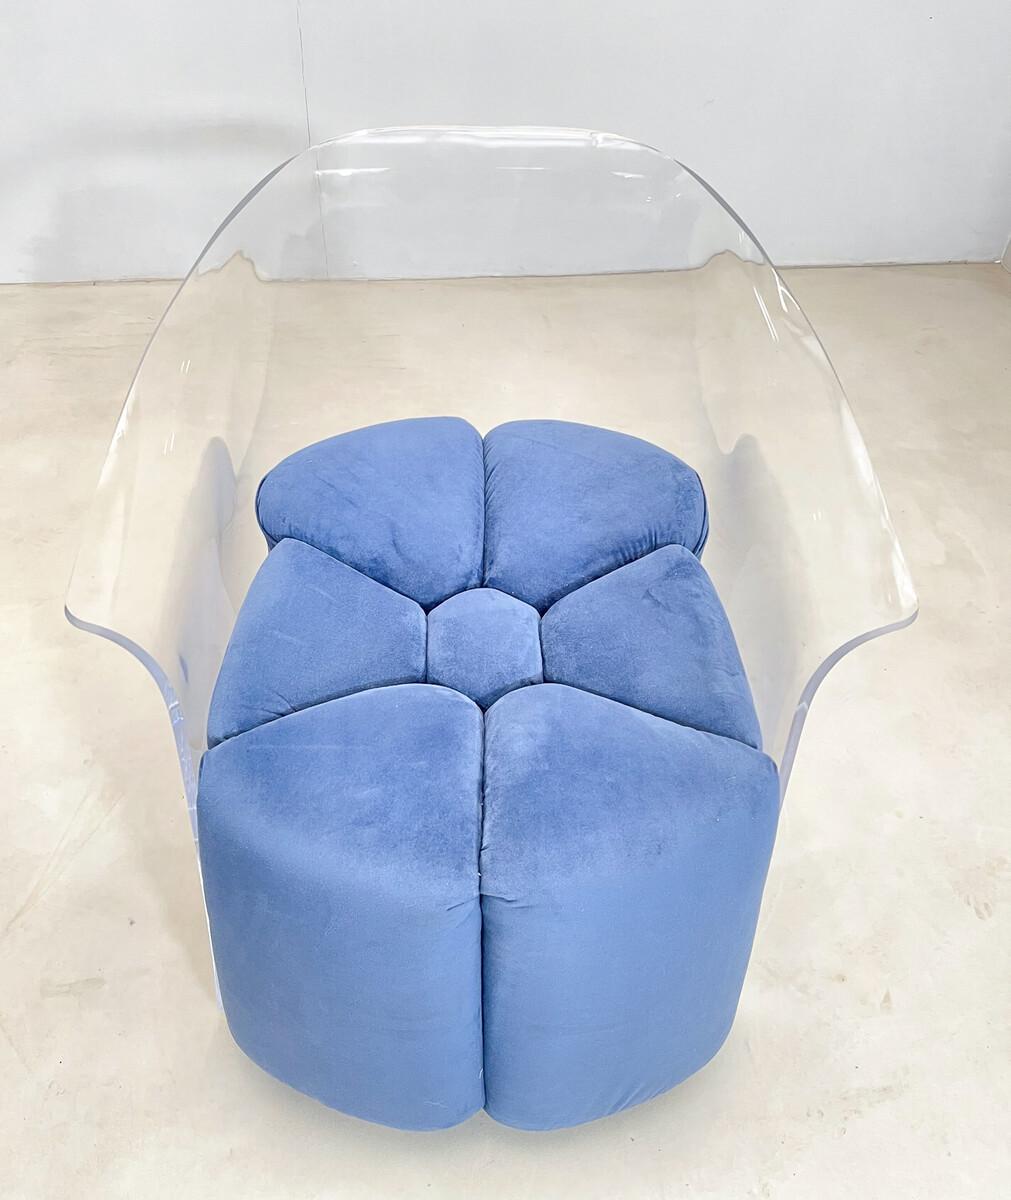 Late 20th Century Mid-Century Modern Pair of Lucite Armchairs, Blue Velvet, Italy, 1970s For Sale